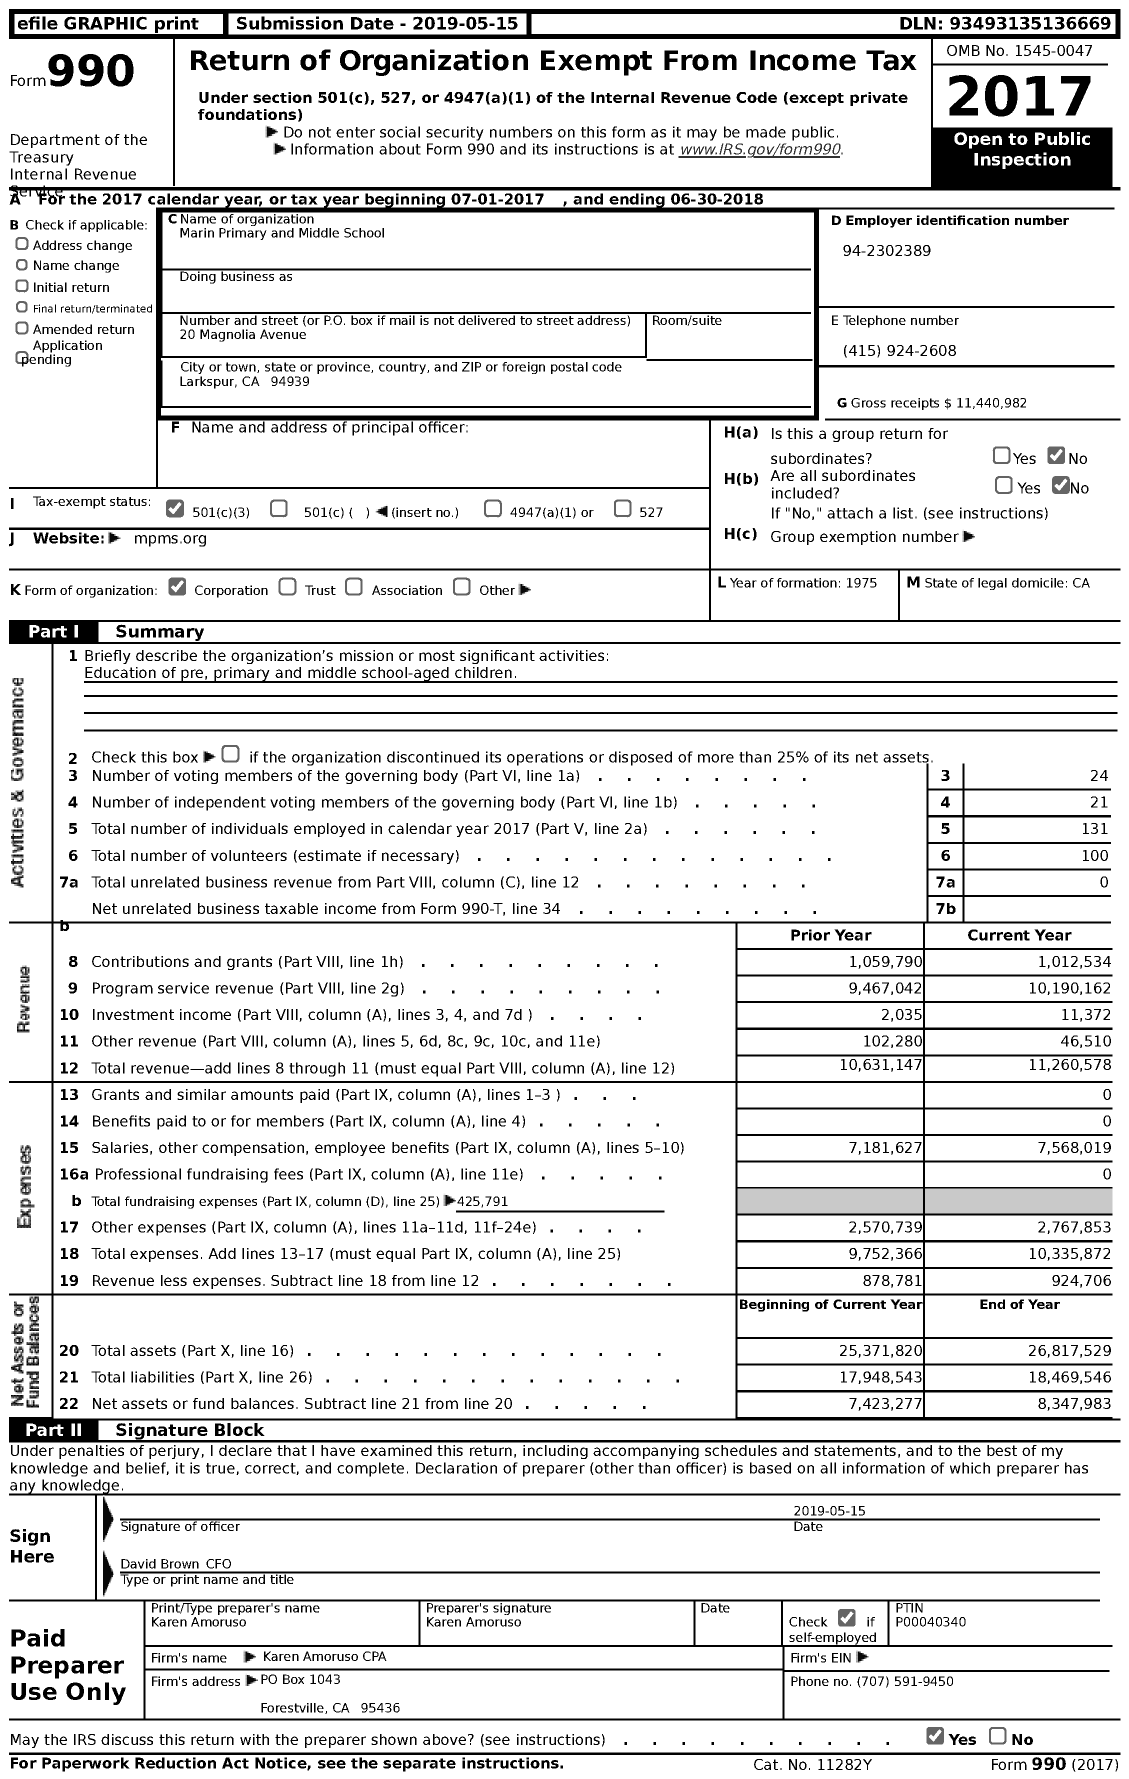 Image of first page of 2017 Form 990 for Marin Primary & Middle School (MP&MS)